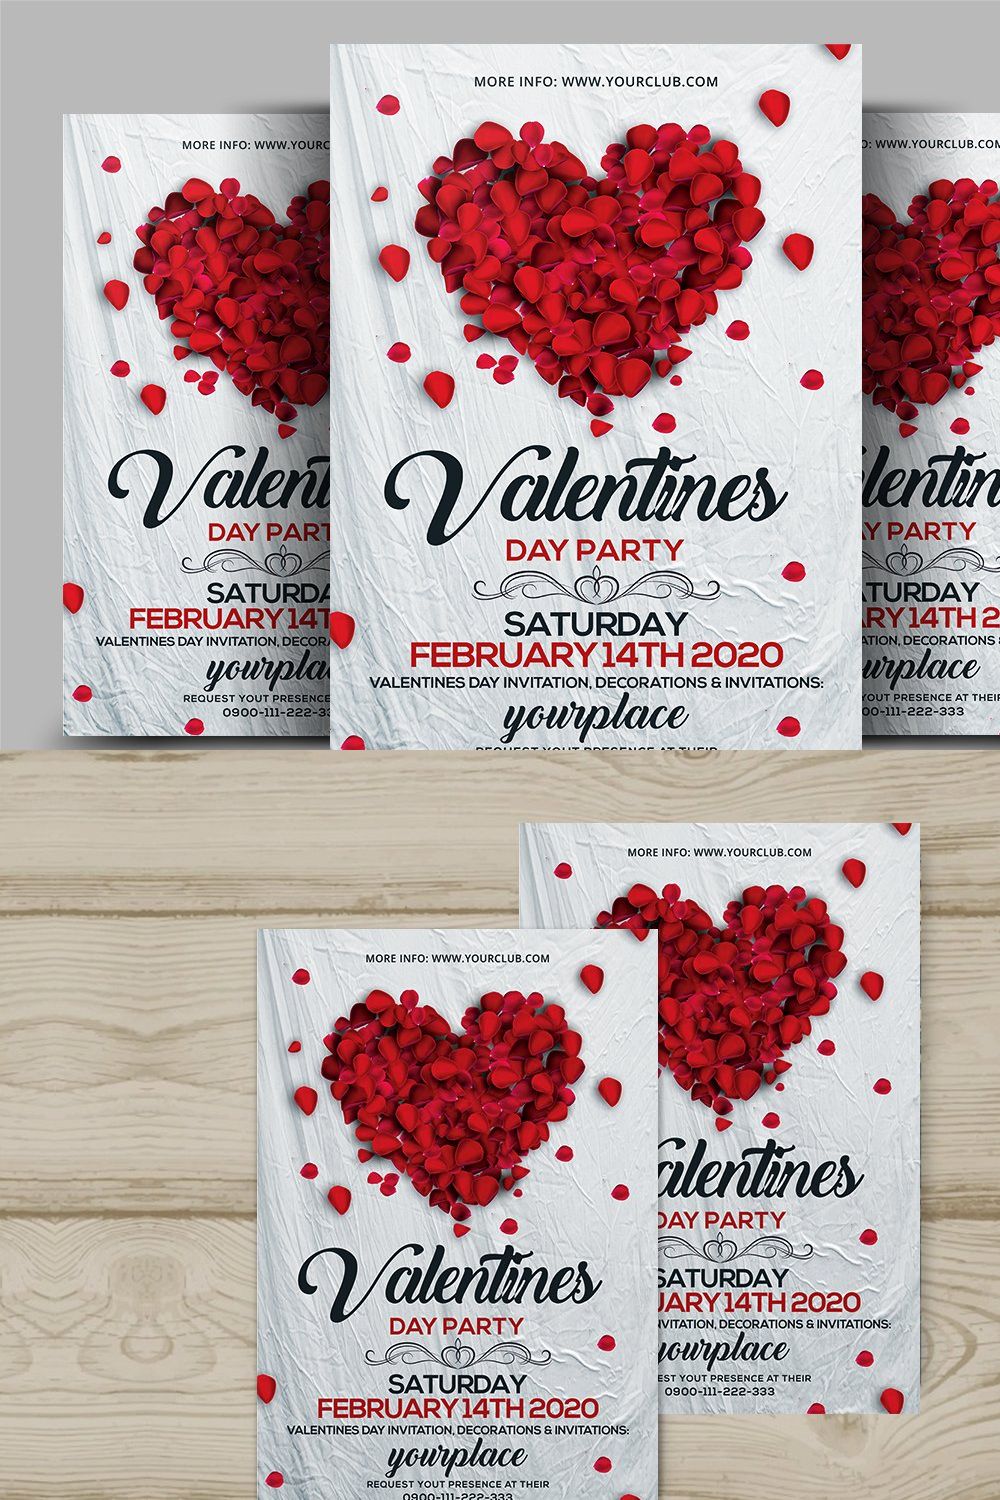 Valentines Day Flyer Invitation pinterest preview image.